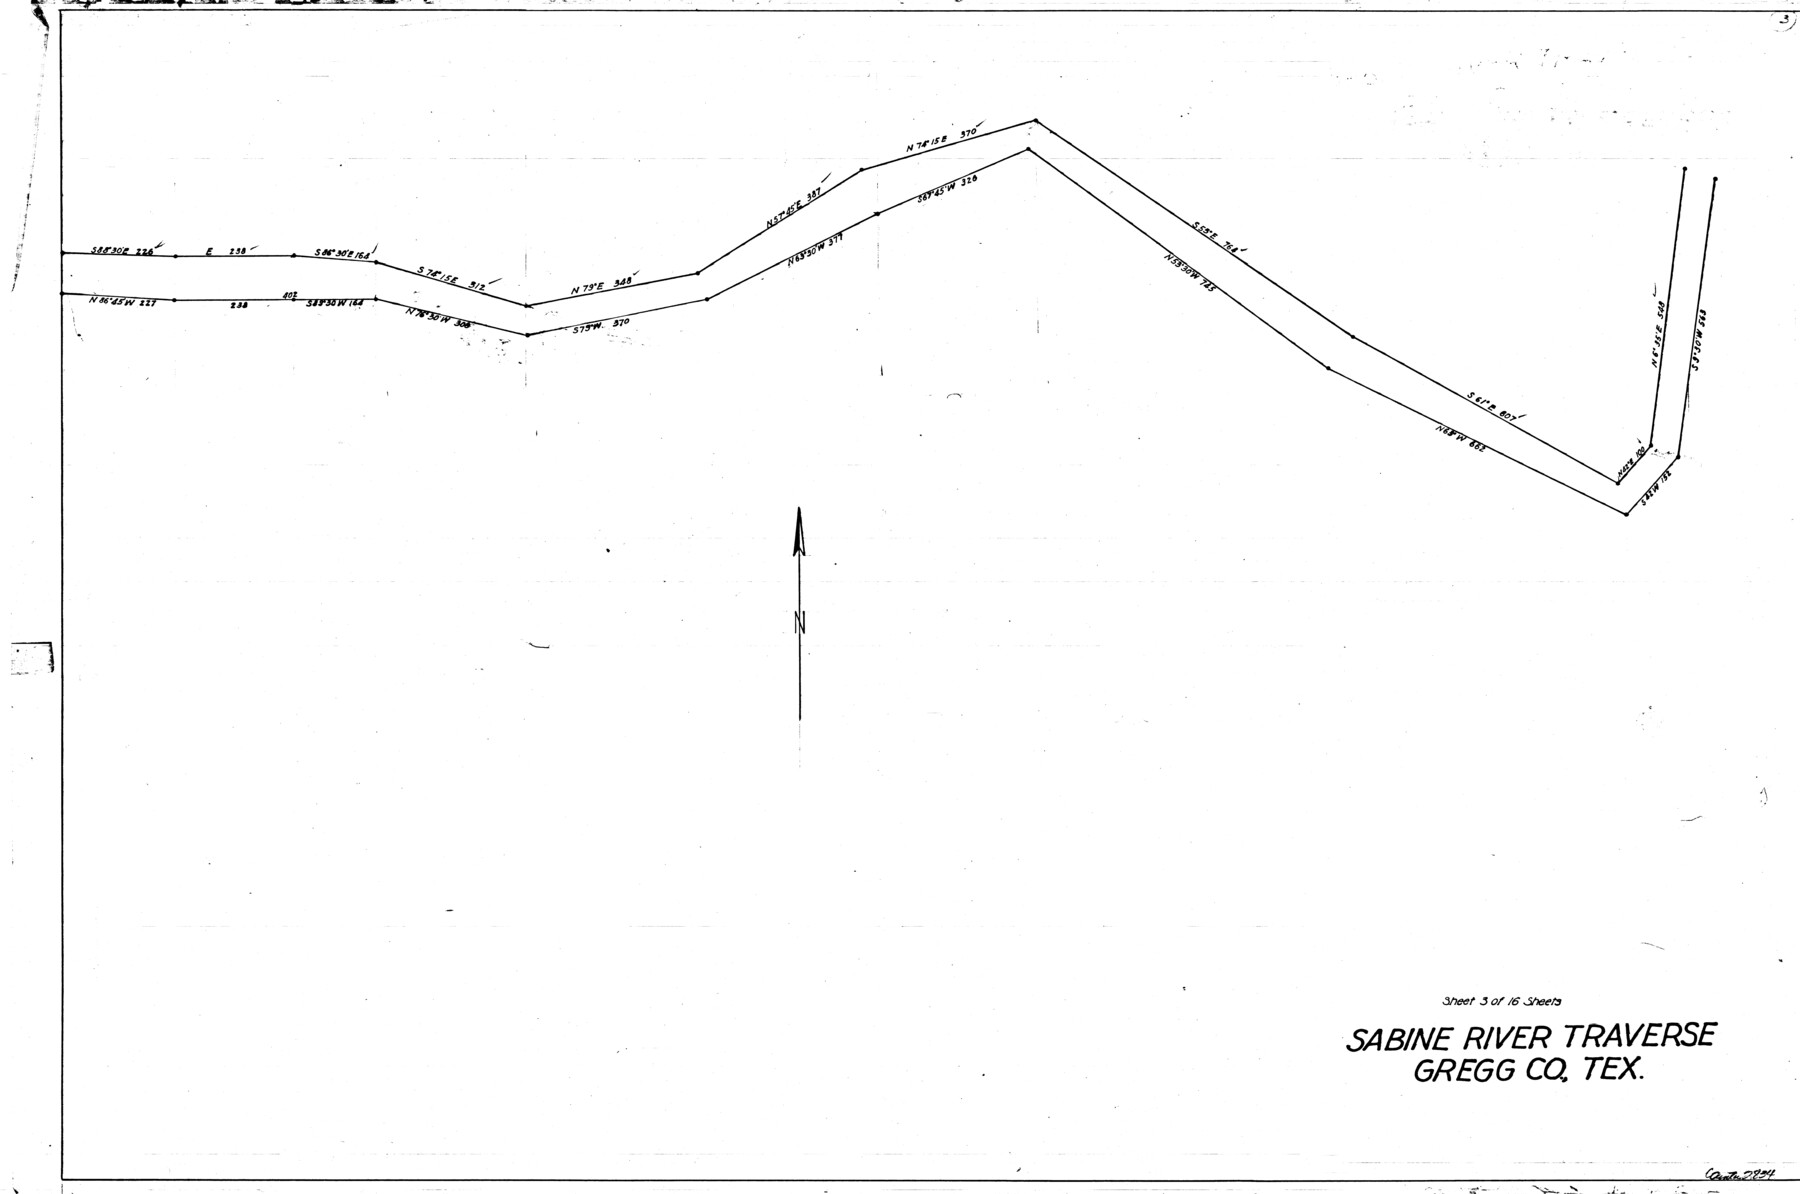 2834, [Sketch for Mineral Application 26501 - Sabine River, T. A. Oldhausen], General Map Collection